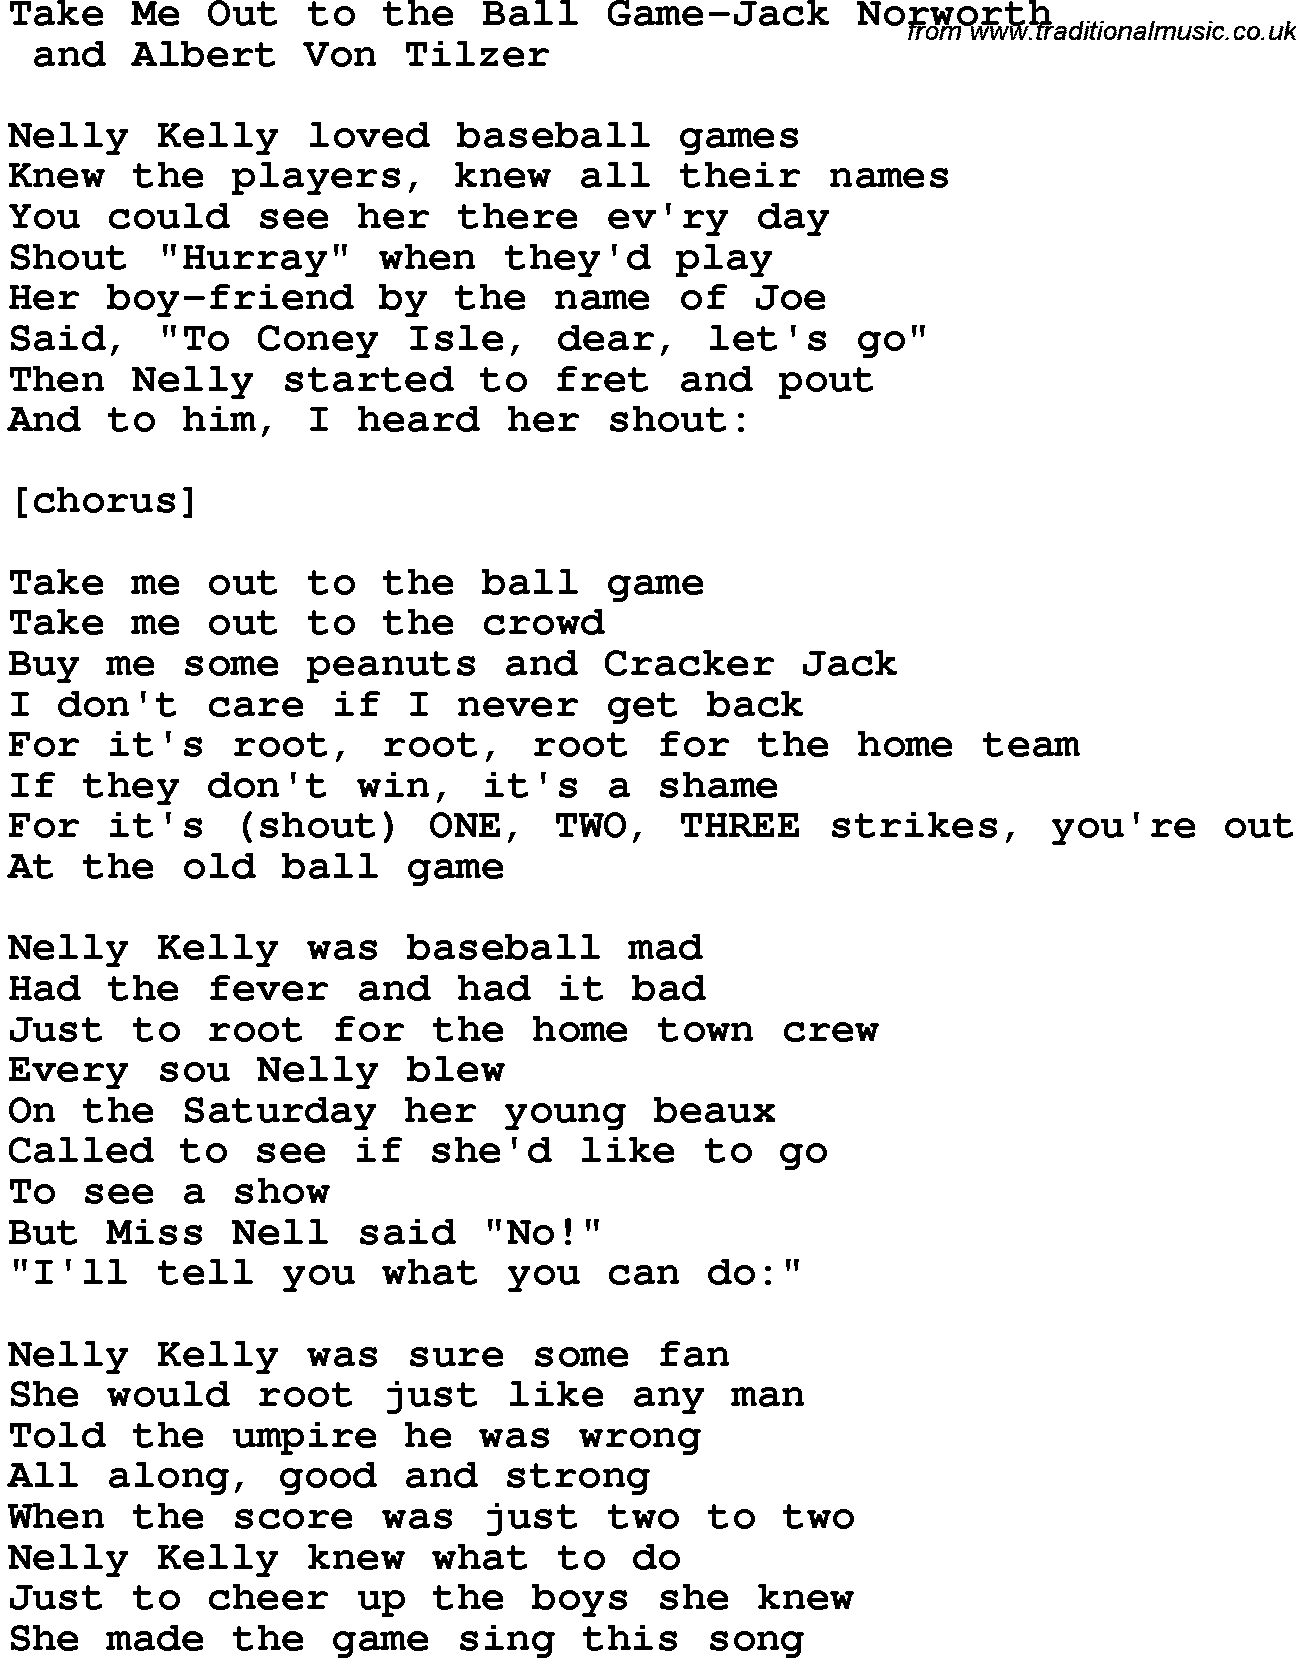 Novelty song: Take Me Out To The Ball Game-Jack Norworth lyrics